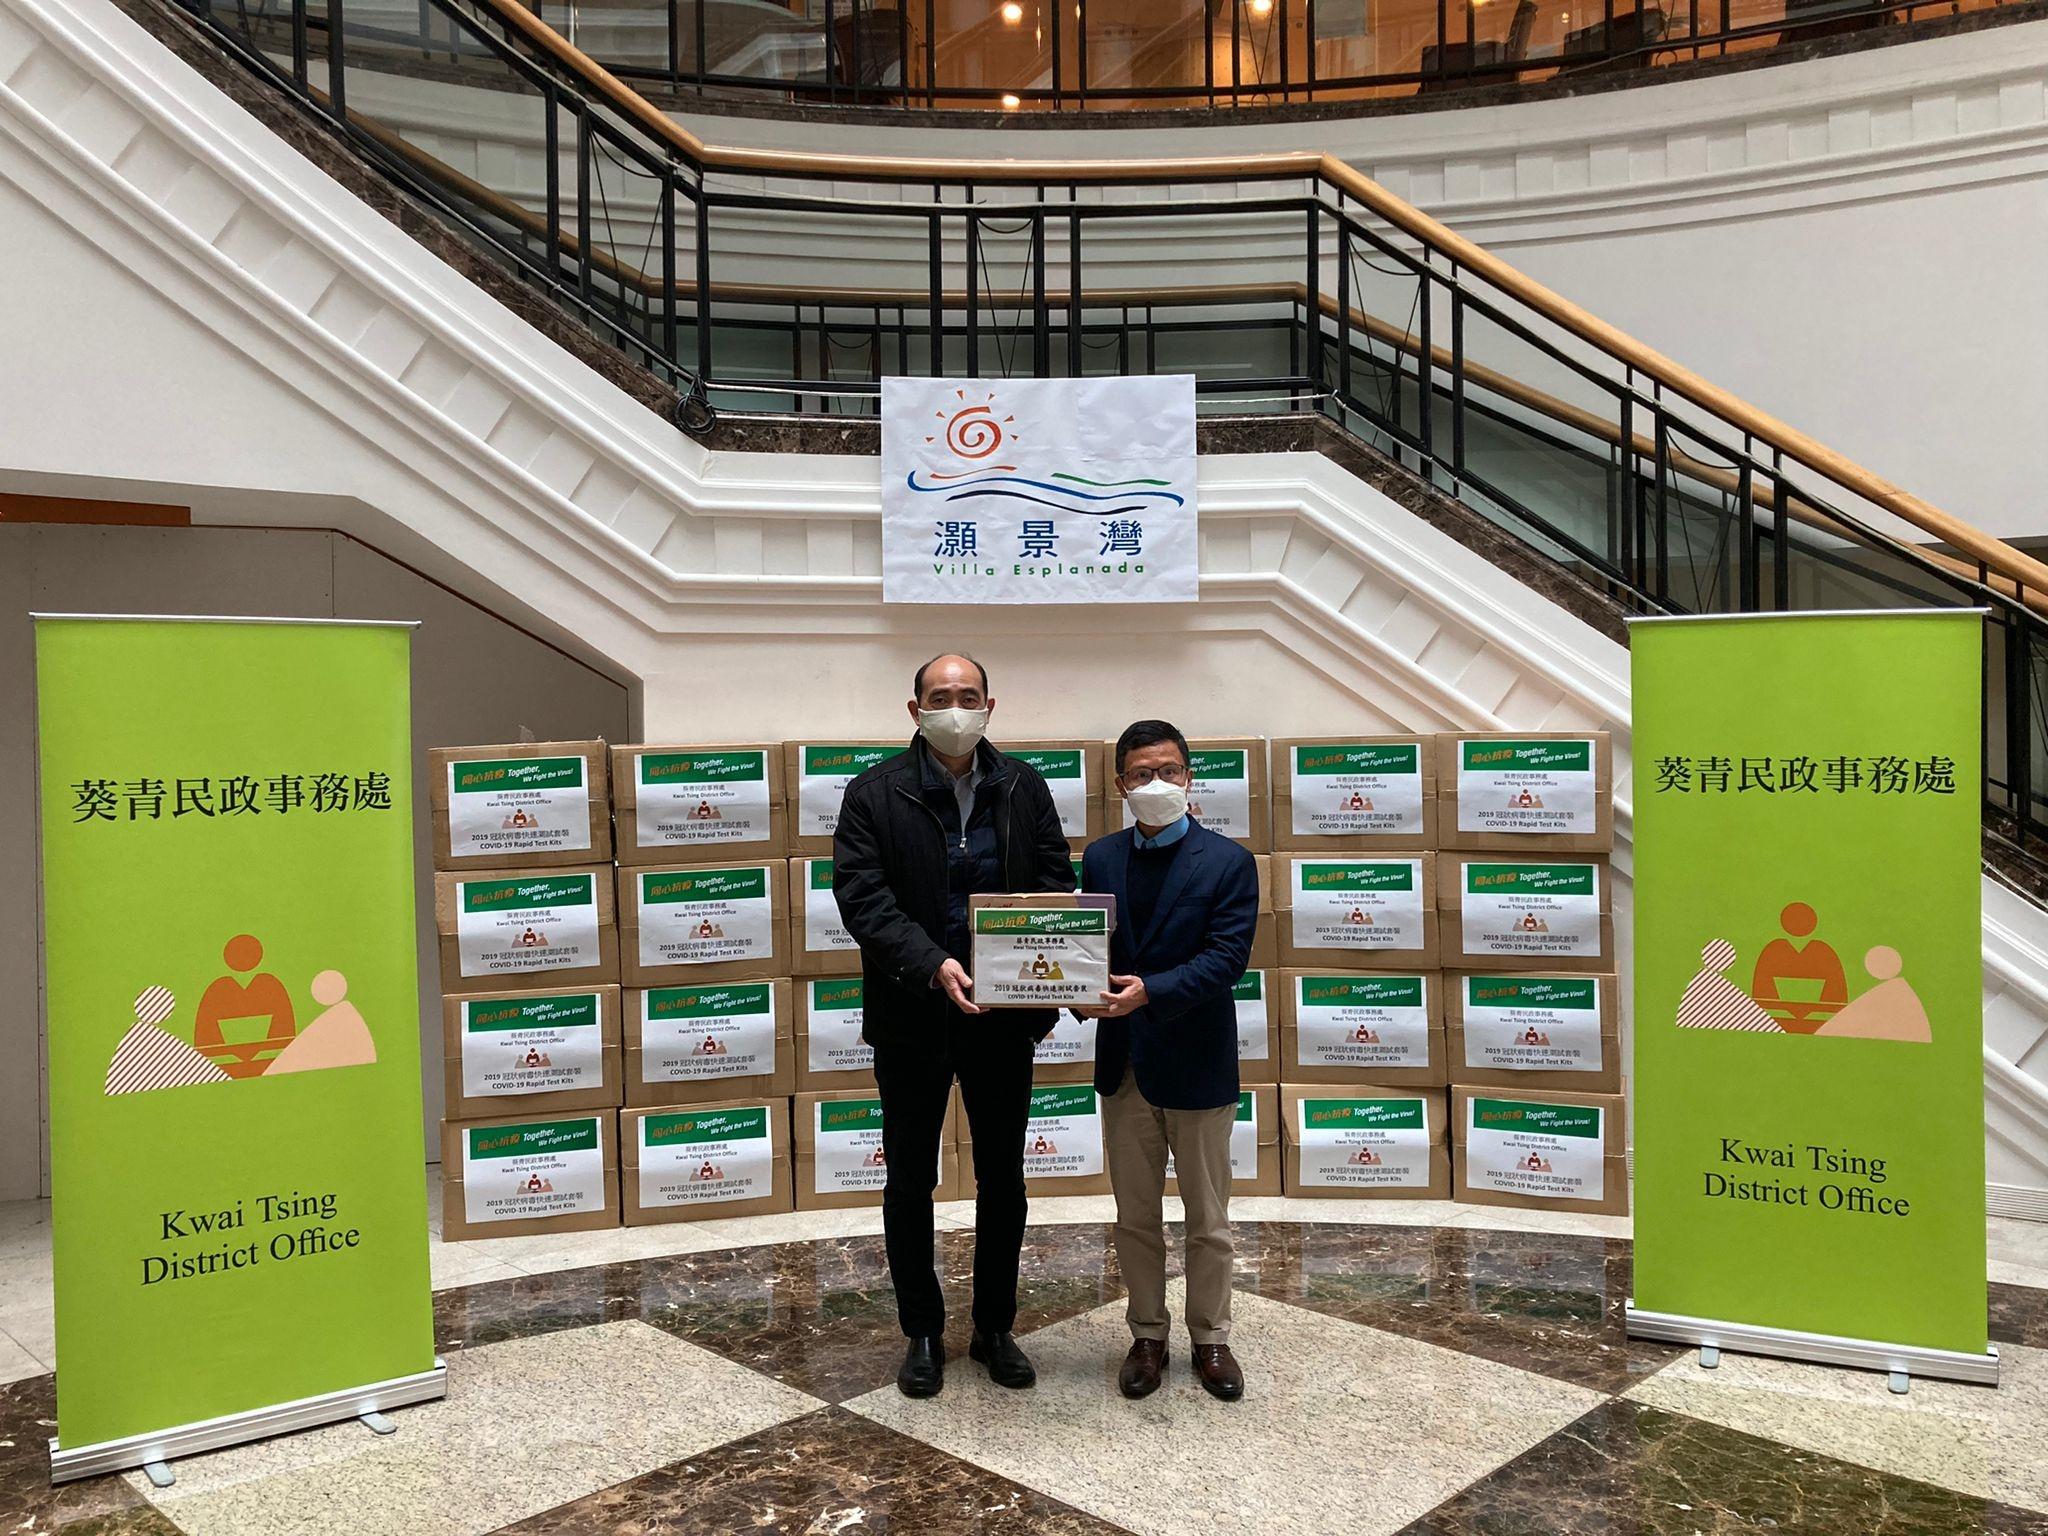 The Kwai Tsing District Office today (February 22) distributed rapid test kits to households, cleansing workers and property management staff living and working in Villa Esplanada for voluntary testing through the property management company.